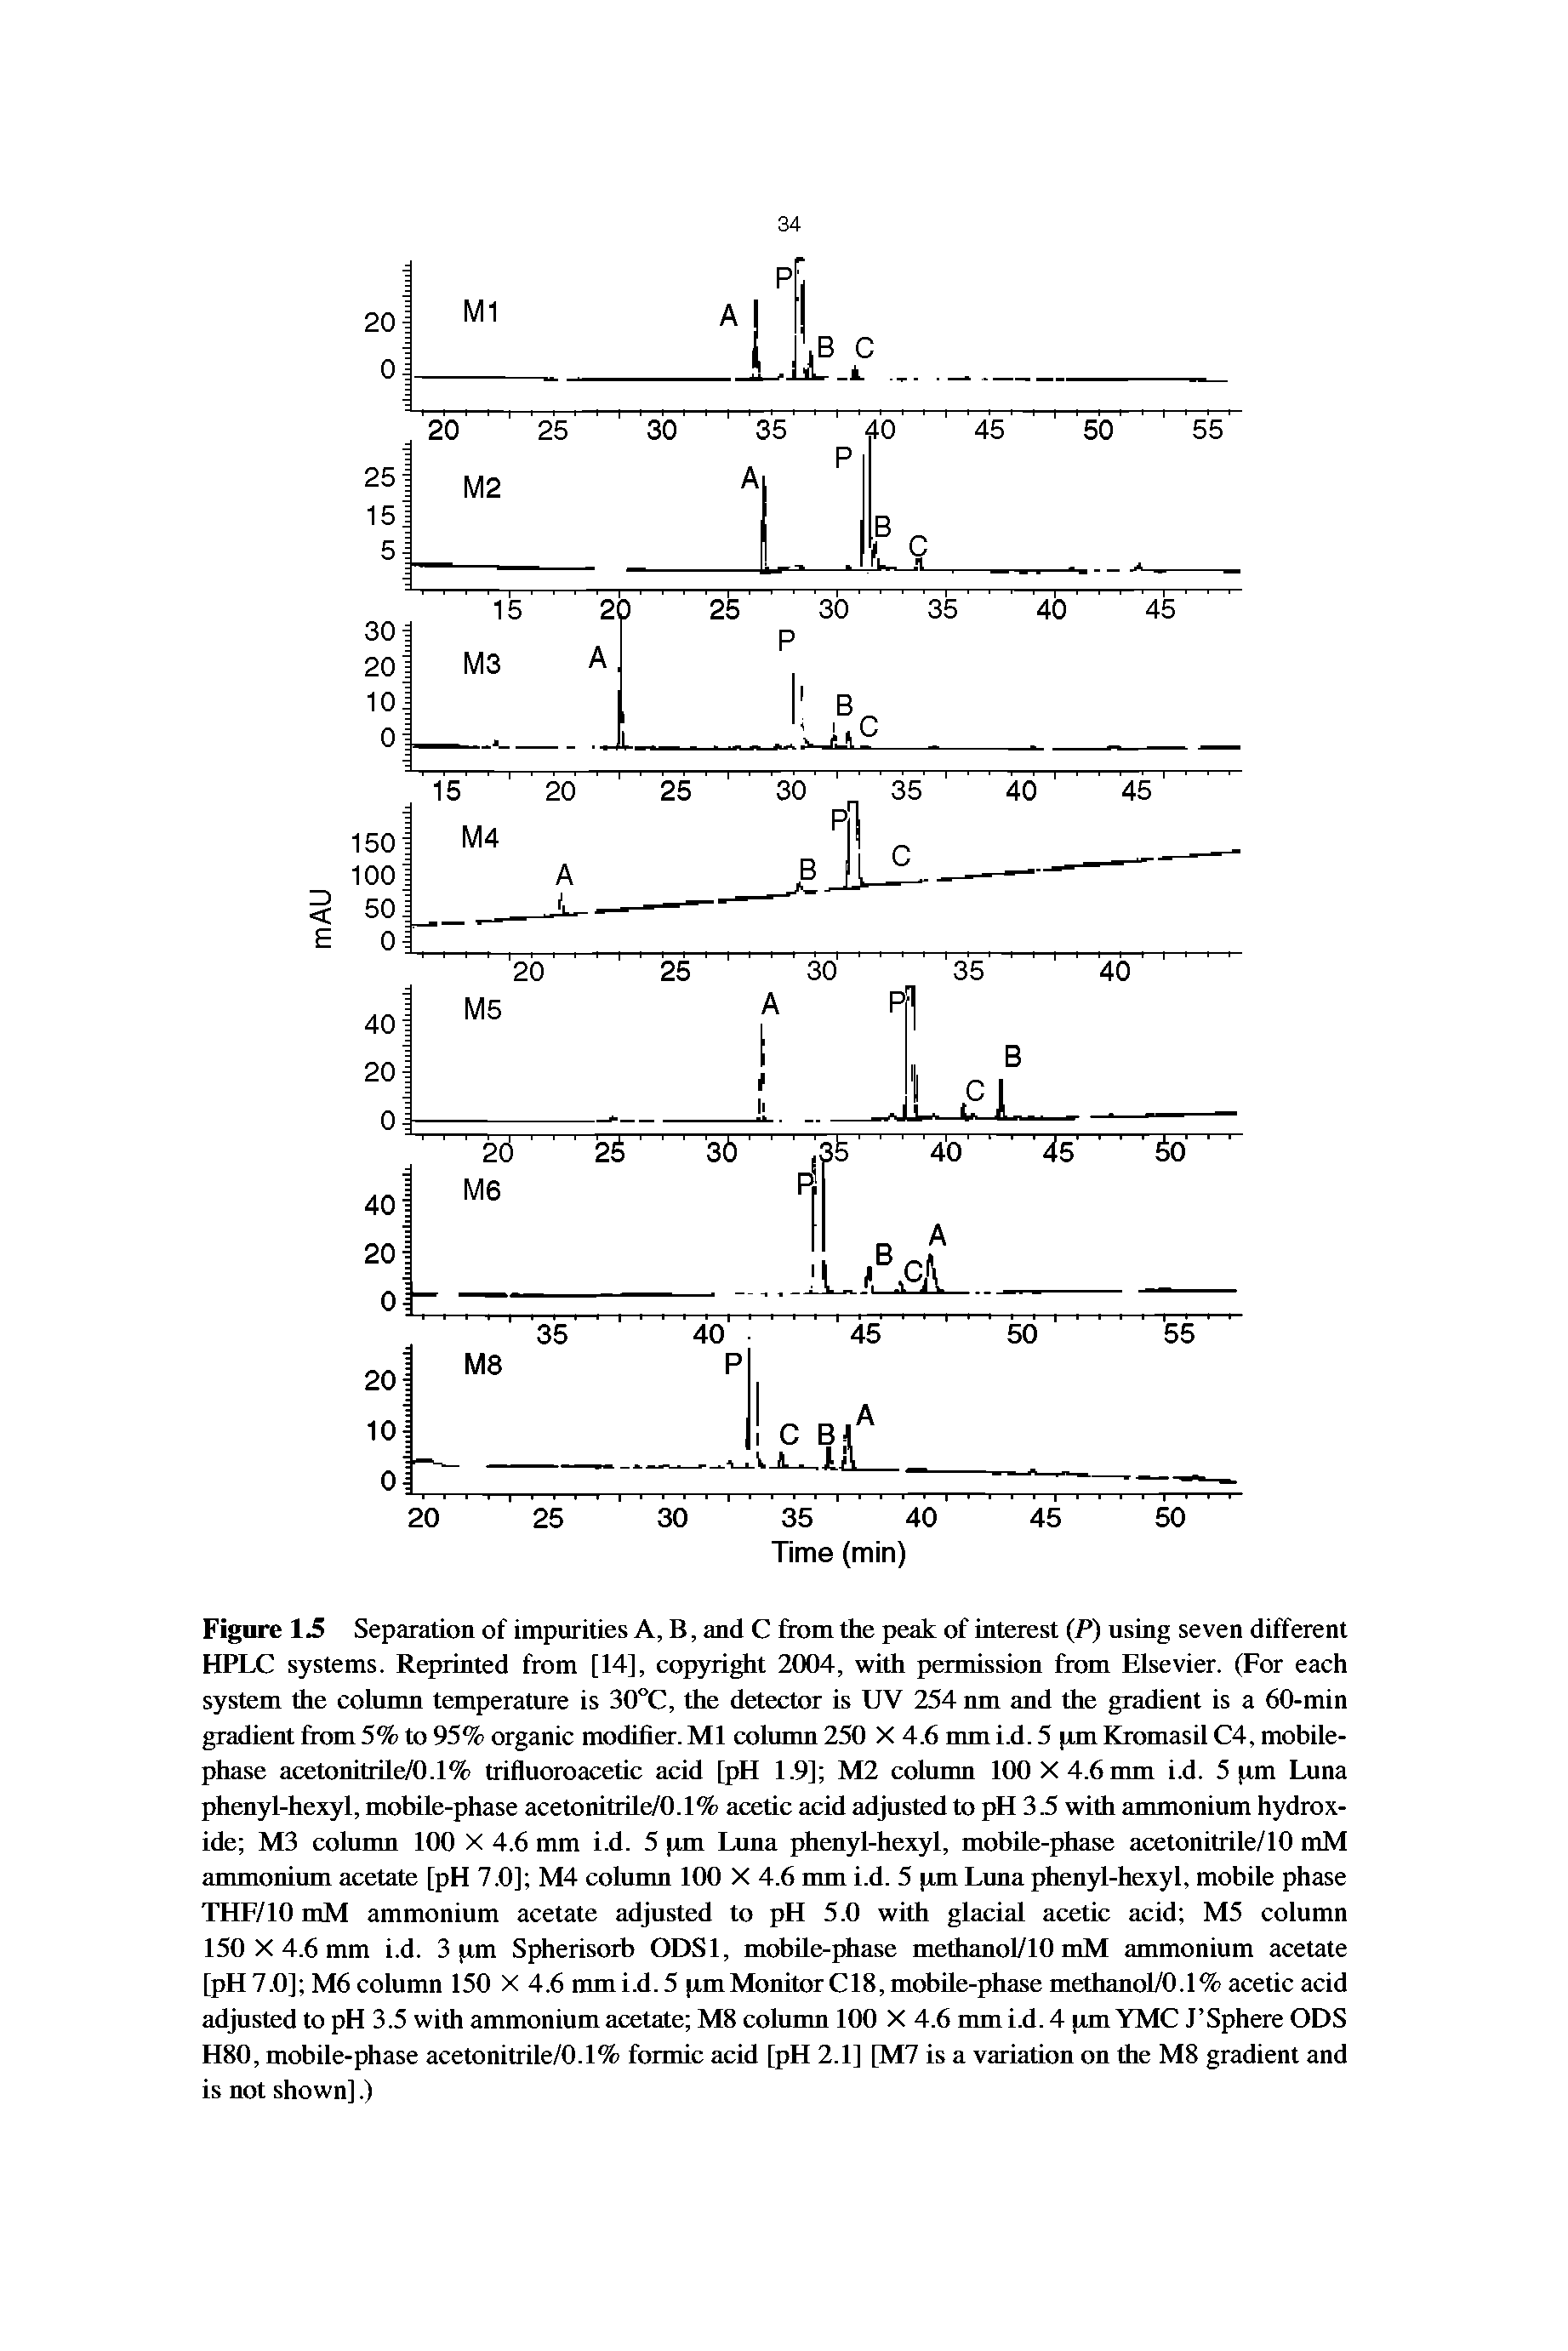 Figure 1 Separation of impurities A, B, and C from the peak of interest (P) using seven different HPLC systems. Reprinted from [14], copyright 2004, with permission from Elsevier. (For each system the column temperature is 30°C, the detector is UV 254 nm and the gradient is a 60-min gradient from 5% to 95% organic modifier. Ml column 250 X 4.6 mm i.d. 5 pm Kromasil C4, mobile-phase acetonitrile/0.1% trifluoroacetic acid [pH 1.9] M2 column 100X4.6 mm i.d. 5 pm Luna phenyl-hexyl, mobile-phase acetonitrile/0.1% acetic acid adjusted to pH 3.5 with ammonium hydroxide M3 column 100 X 4.6 mm i.d. 5 pm Luna phenyl-hexyl, mobile-phase acetonitrile/10 mM ammonium acetate [pH 7.0] M4 column 100 X 4.6 mm i.d. 5 pm Luna phenyl-hexyl, mobile phase THF/10 mM ammonium acetate adjusted to pH 5.0 with glacial acetic acid M5 column 150 X 4.6 mm i.d. 3 pm Spherisorb ODSl, mobile-phase methanol/10 mM ammonium acetate [pH 7.0] M6 column 150 X 4.6 mm i.d. 5 pm Monitor Cl8, mobile-phase methanol/0.1% acetic acid adjusted to pH 3.5 with ammonium acetate M8 column 100 X 4.6 mm i.d. 4 pm YMC J Sphere ODS H80, mobile-phase acetonitrile/0.1% formic acid [pH 2.1] [M7 is a variation on the M8 gradient and is not shown].)...